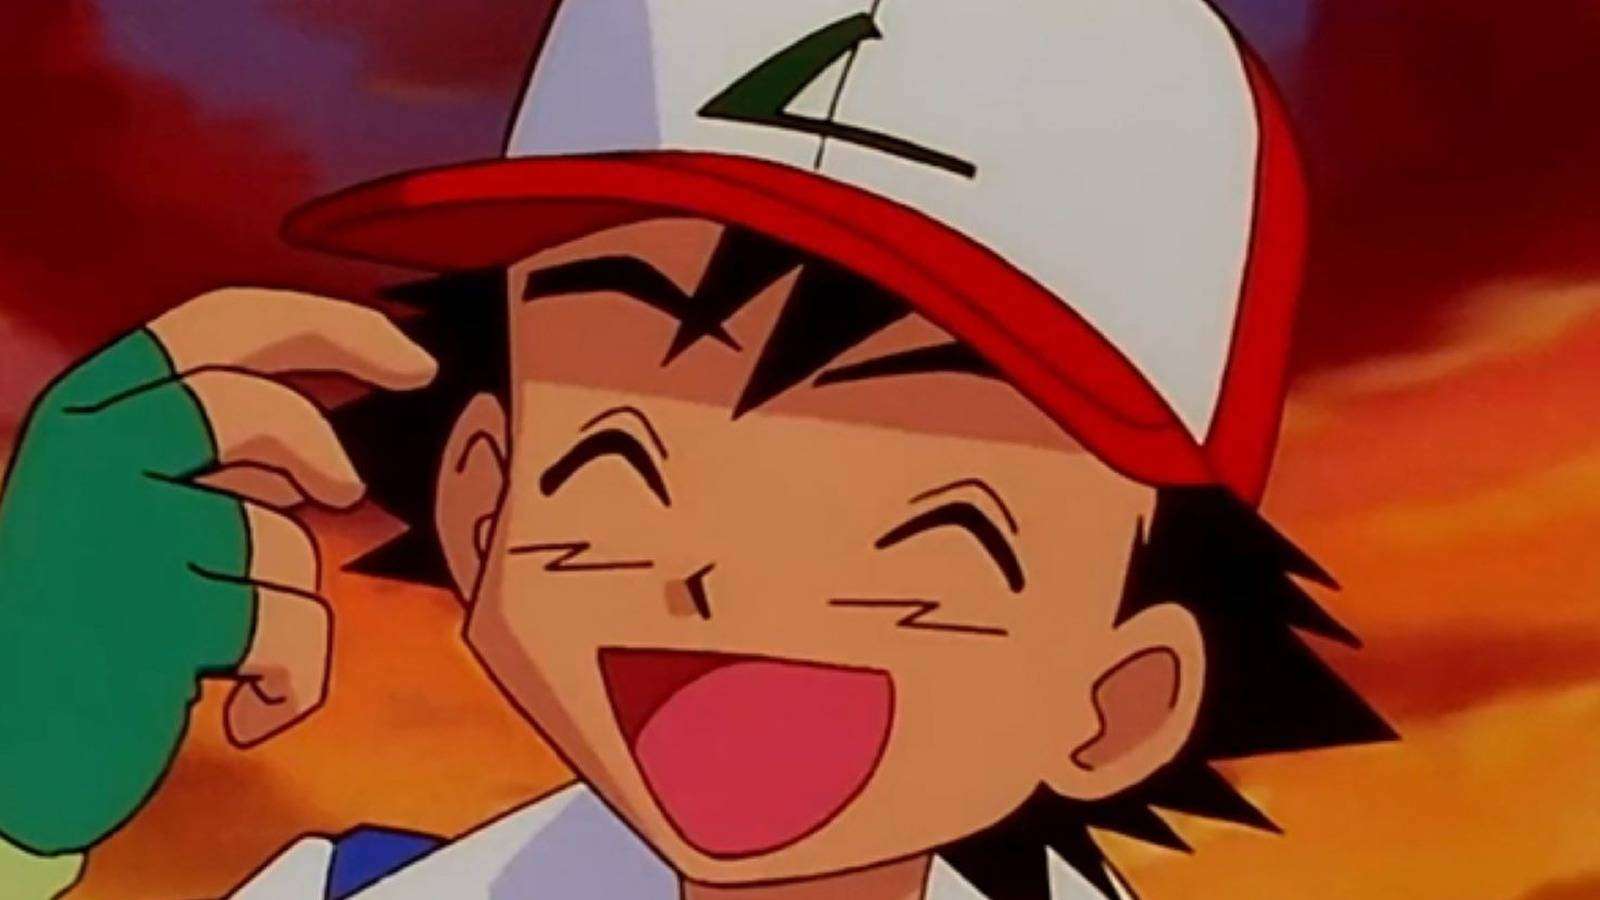 Ash Ketchum appears laughing